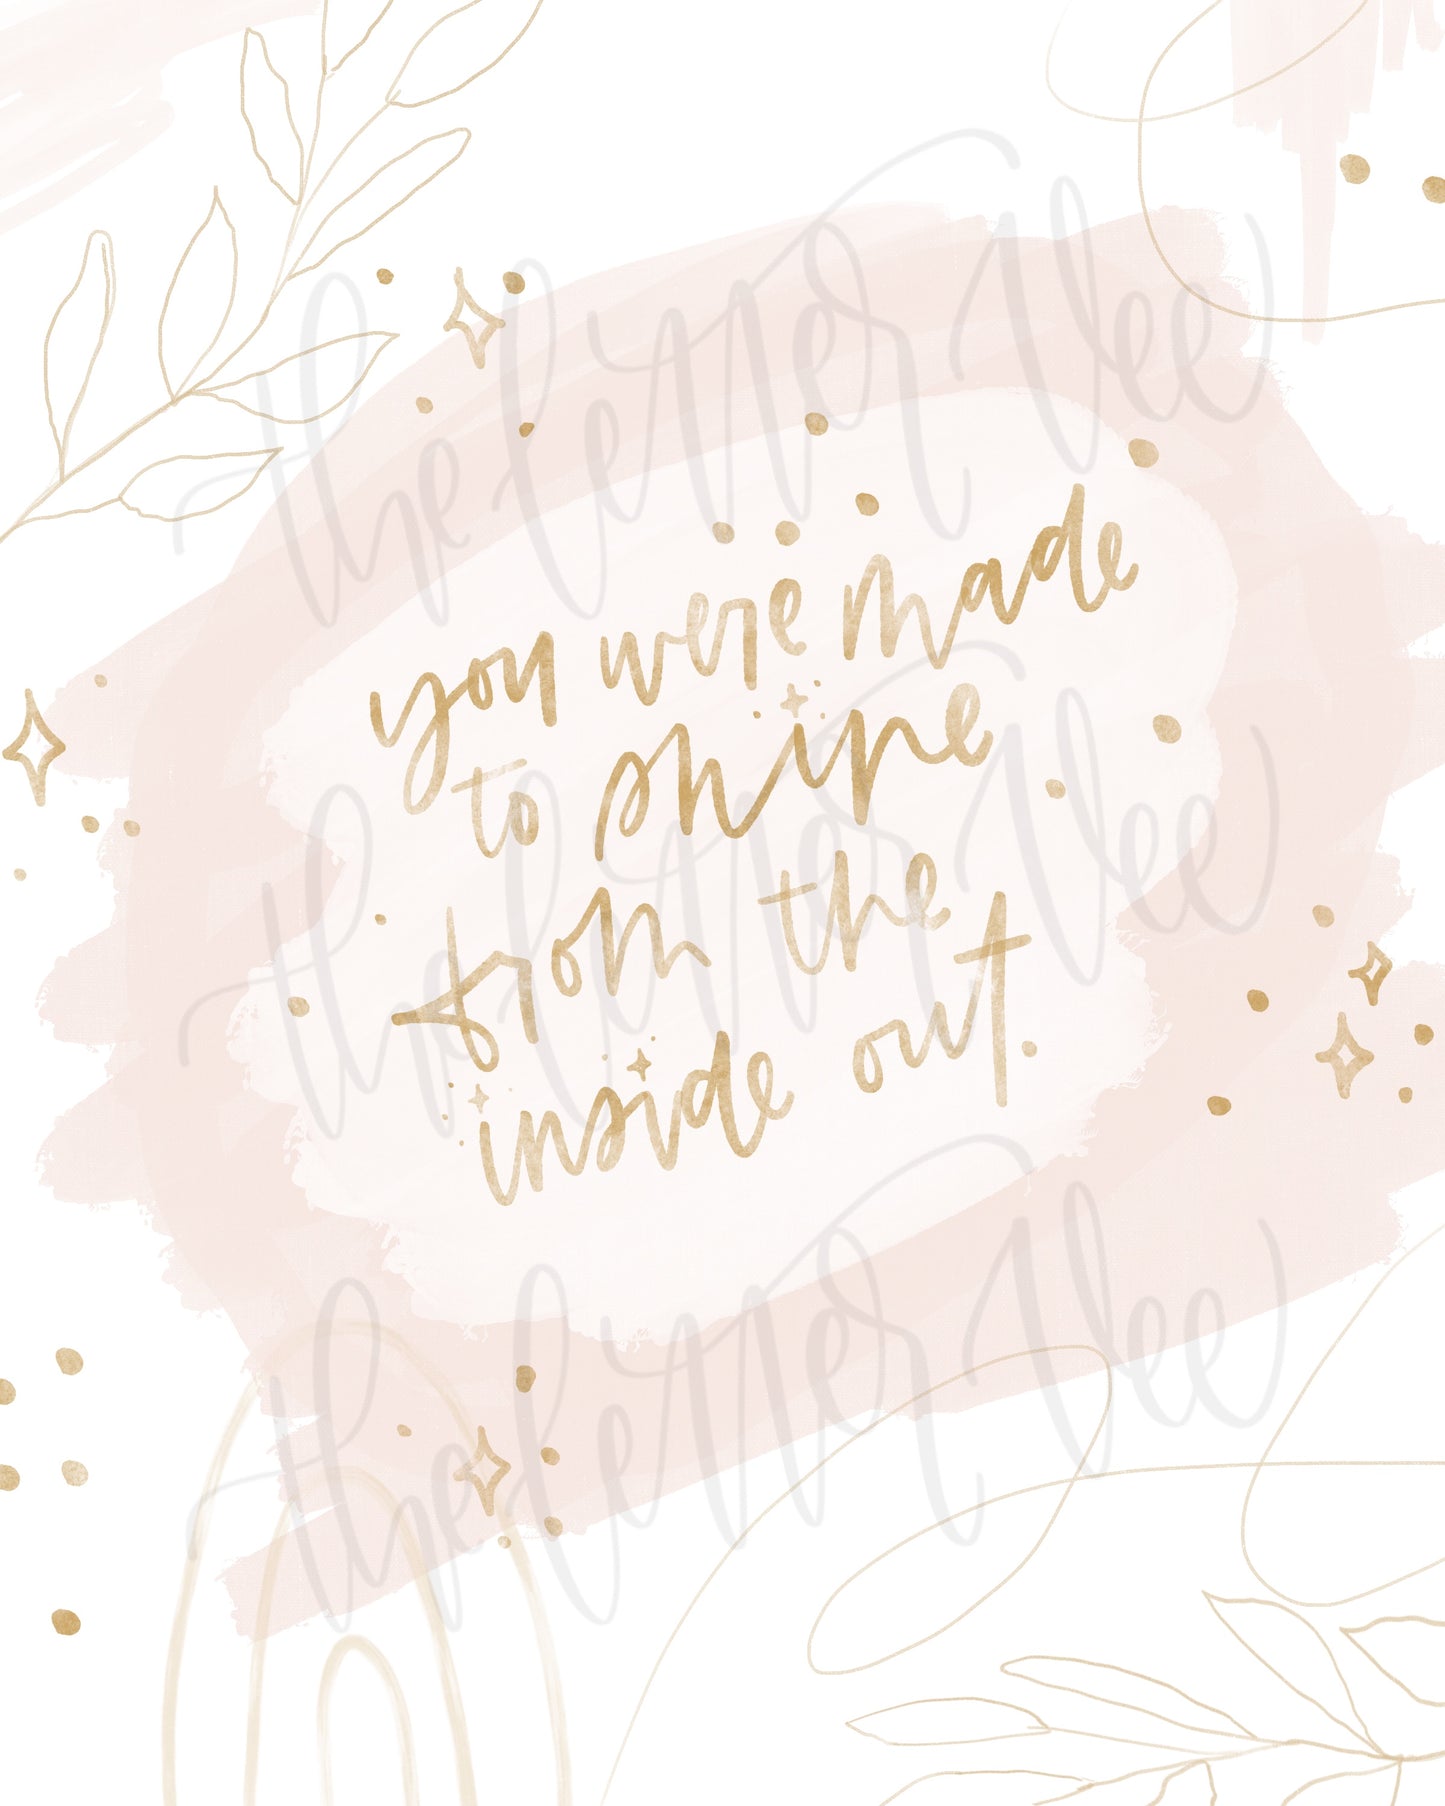 You were made to shine | Affirmation Art Print